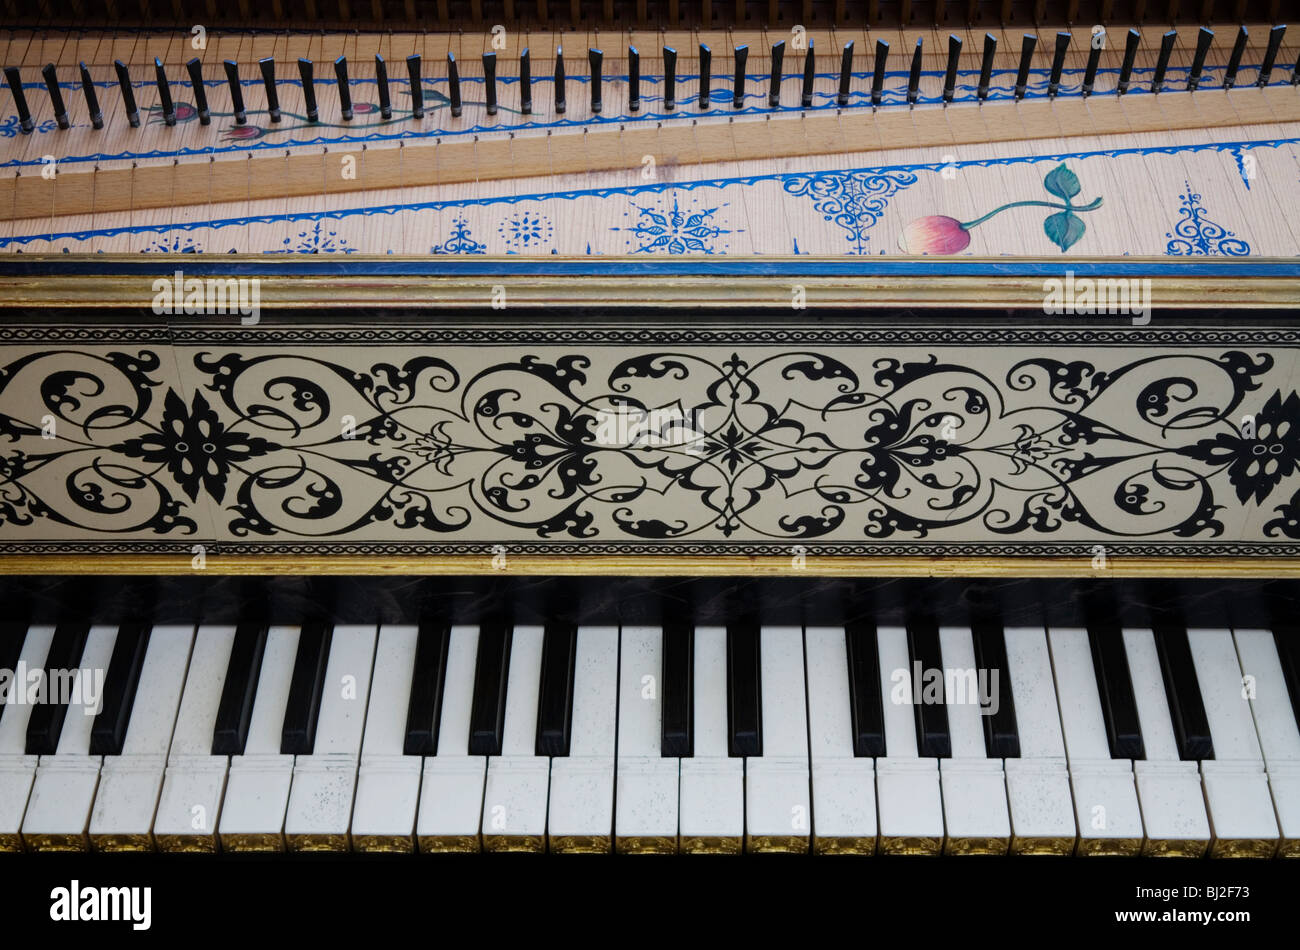 Musical instruments cembalo keyboard Harpsichord in the Flemish style Antwerpen 1618 Stock Photo